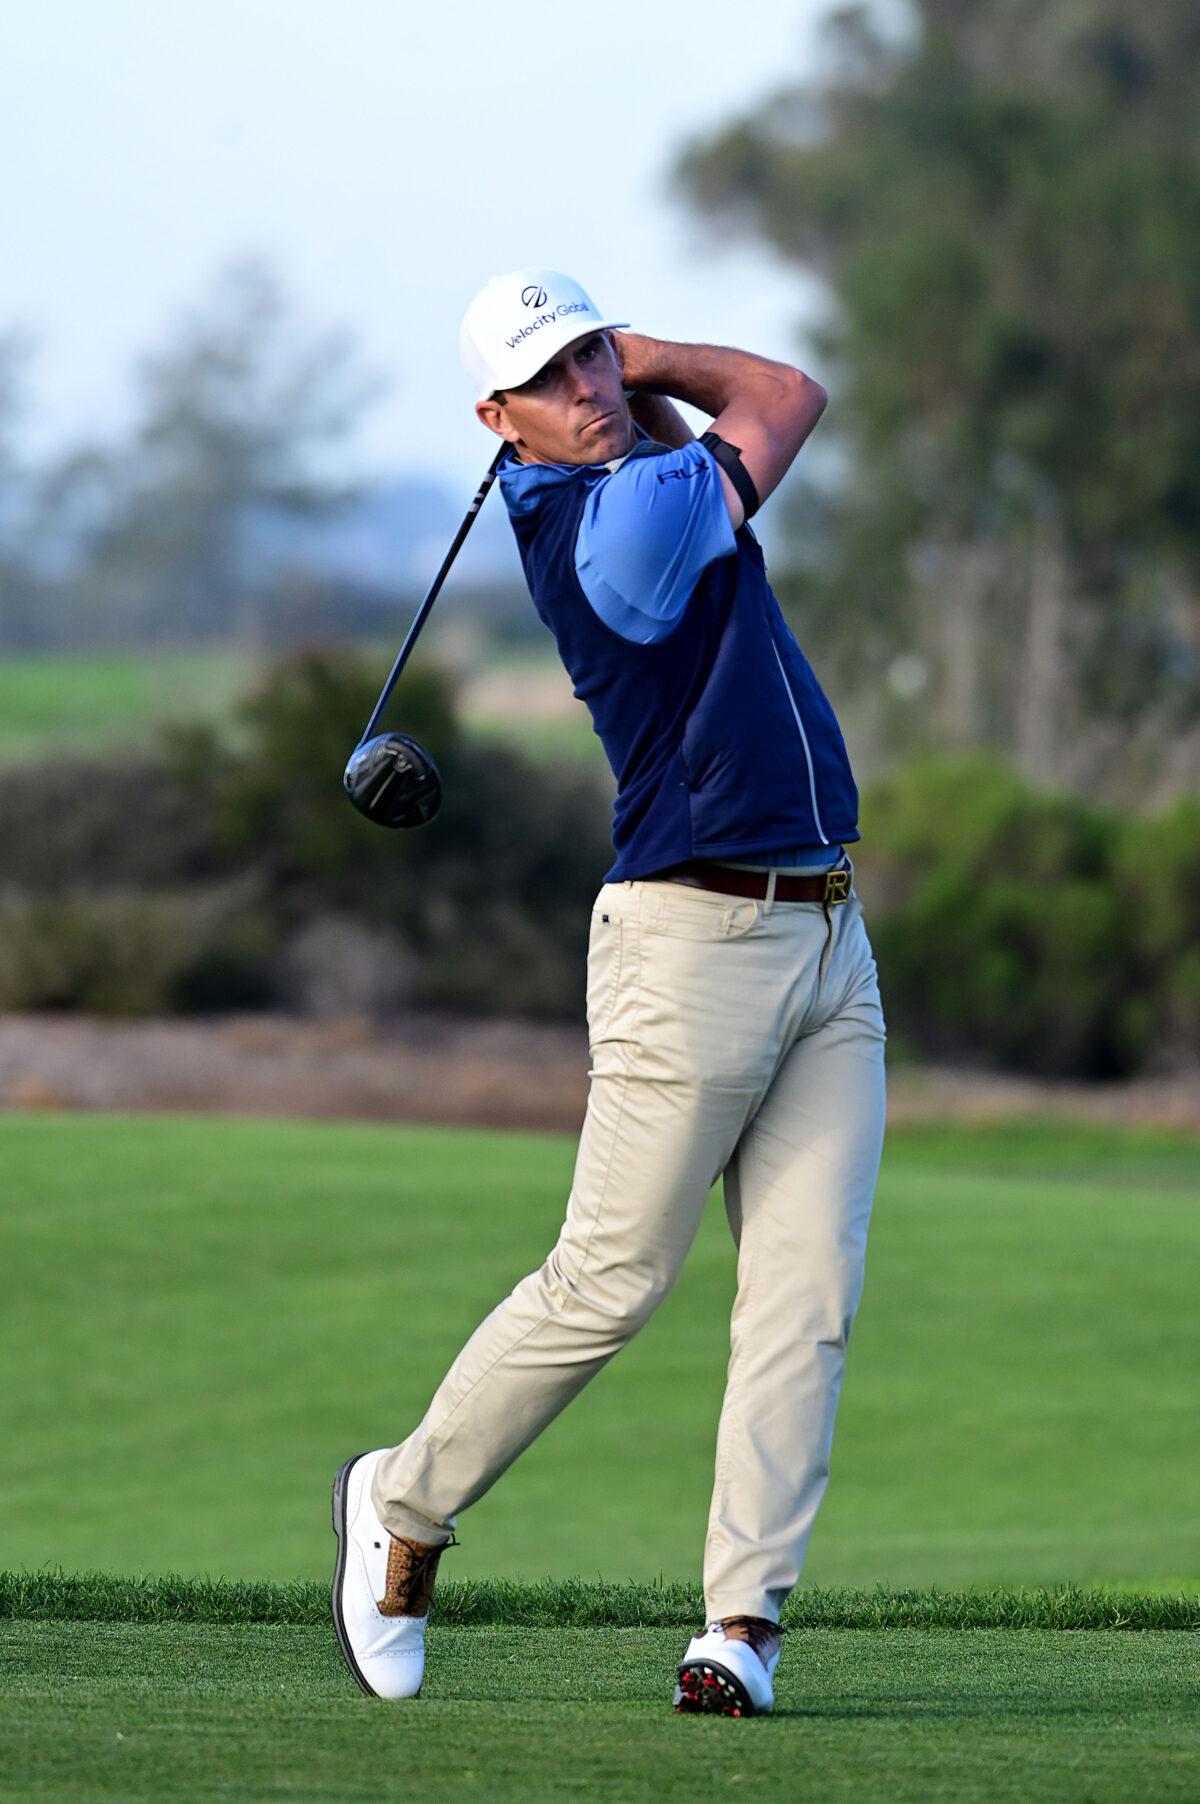 Billy Horschel hits his tee shot on the 18th hole during the first round of The Farmers Insurance Open on the North Course at Torrey Pines Golf Course, in La Jolla, California, on January 26, 2022. (Donald Miralle/Getty Images)